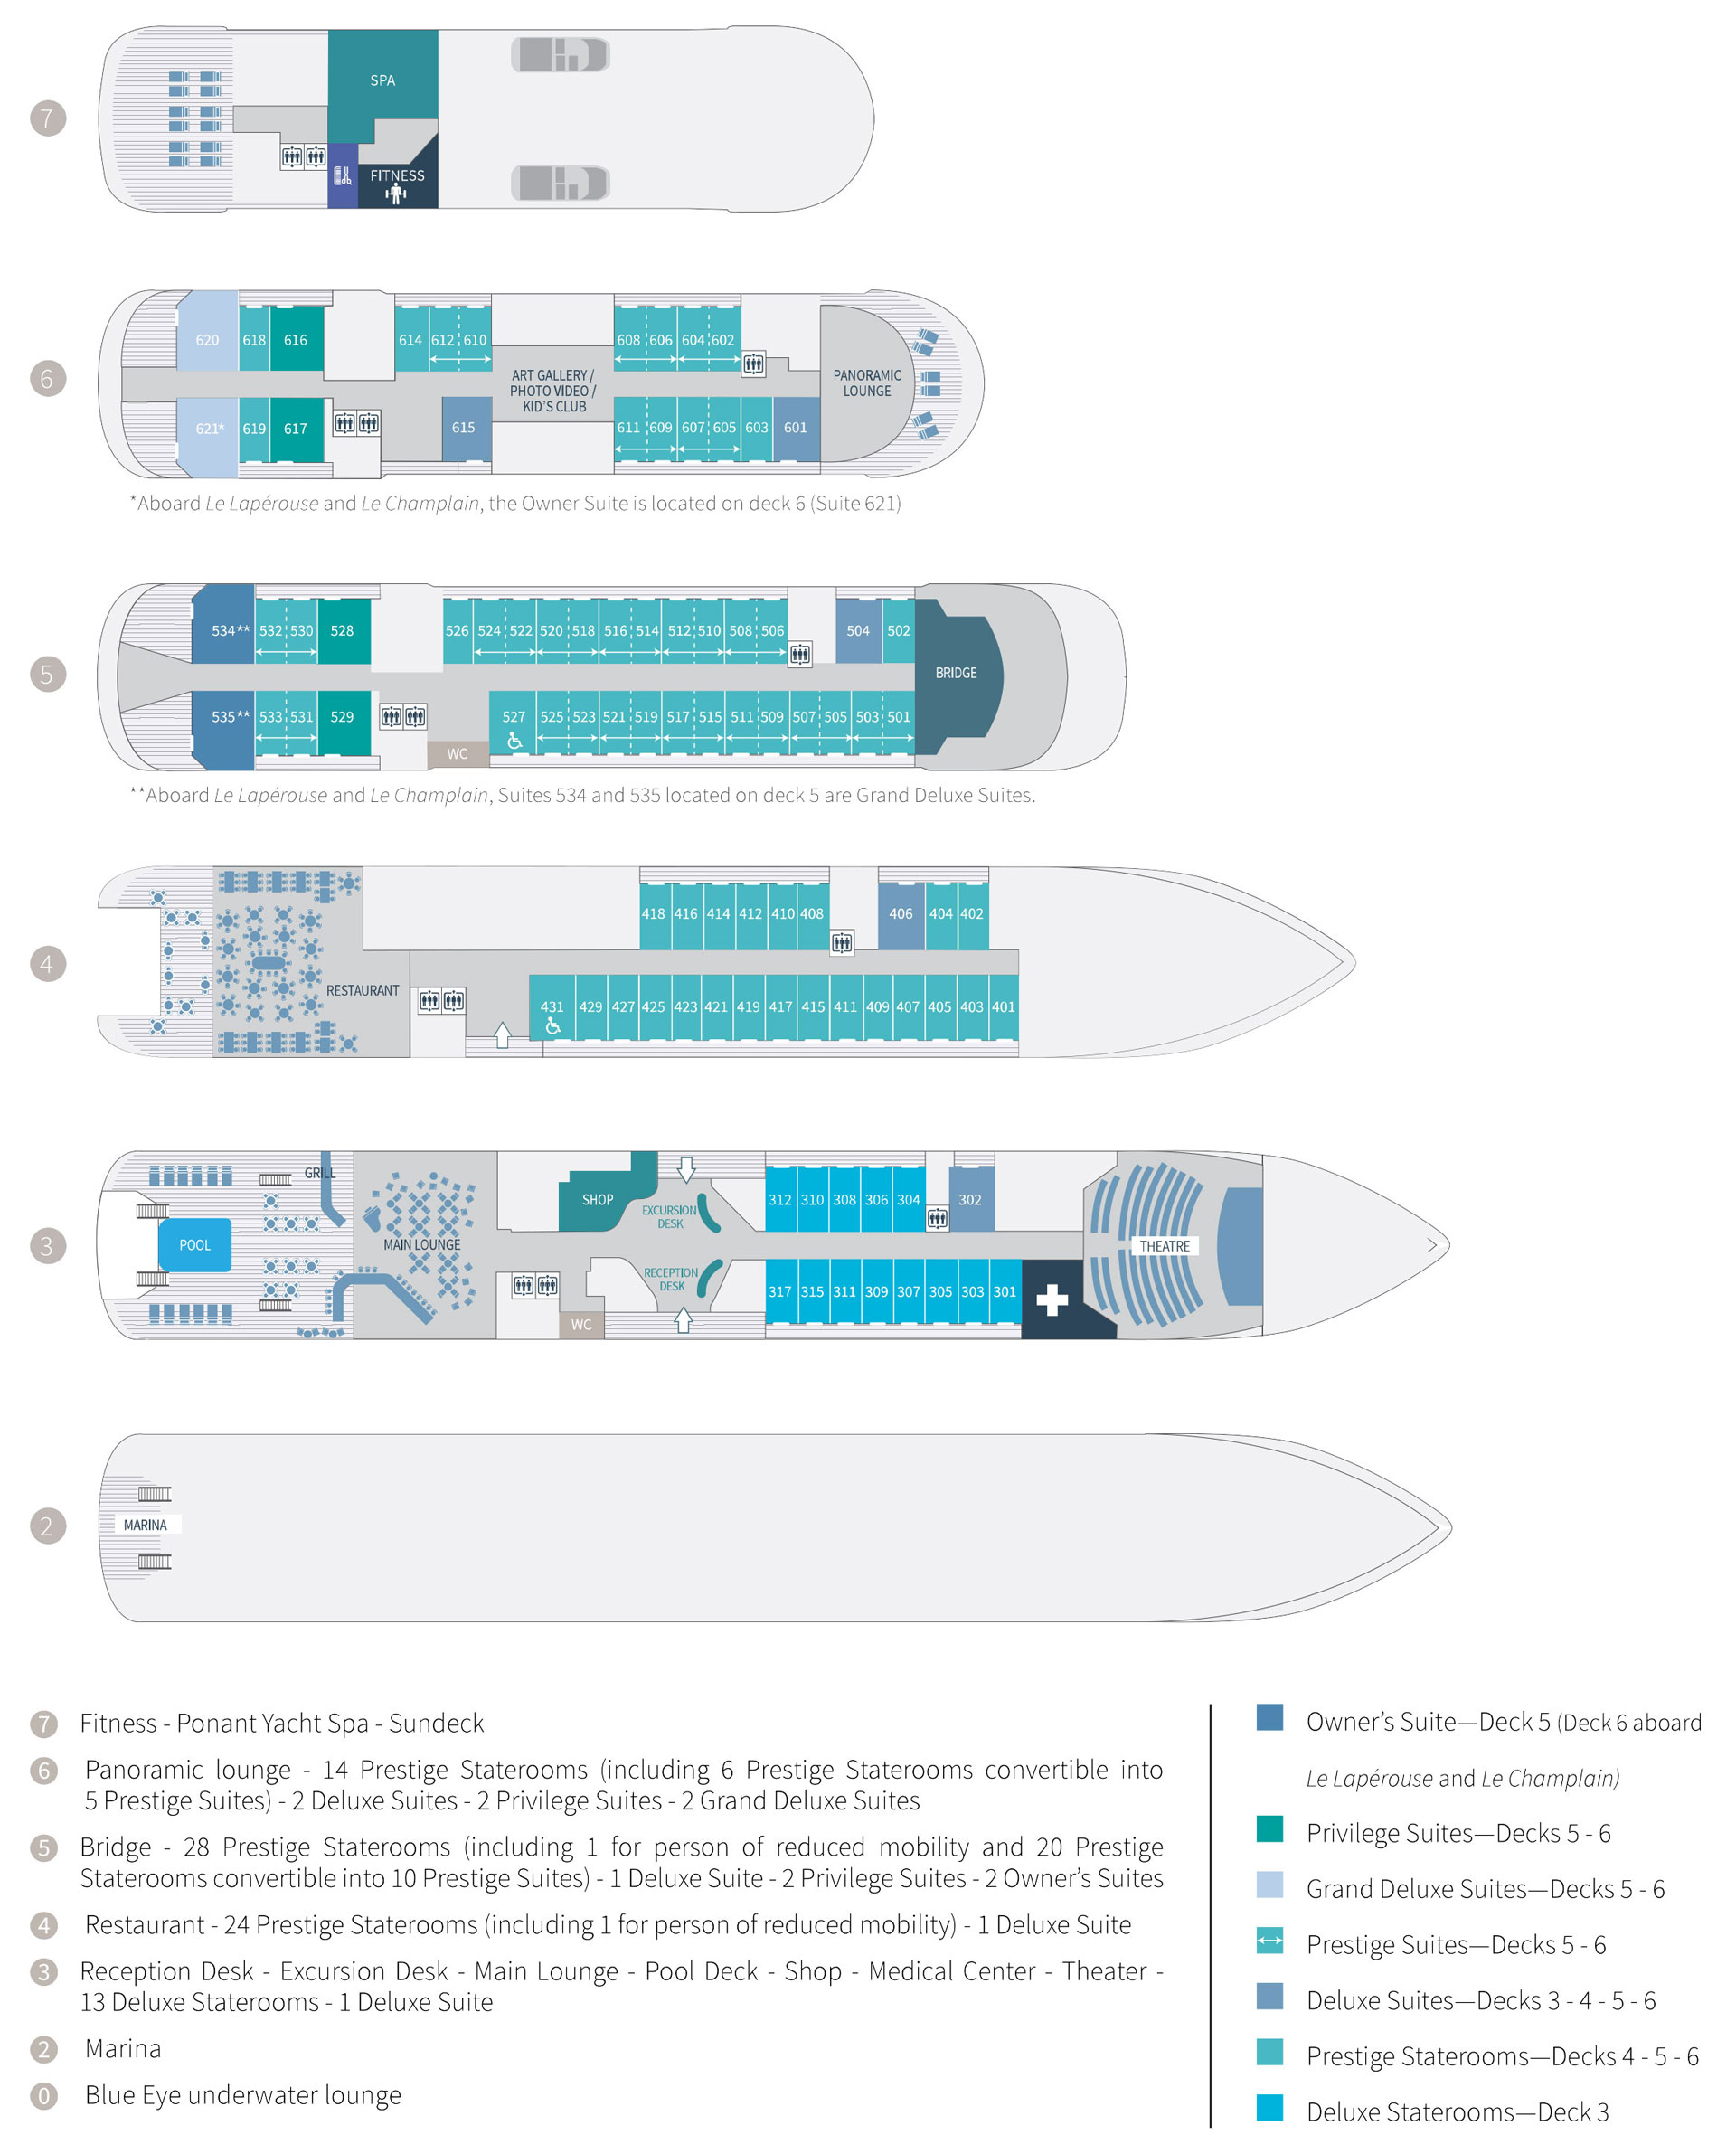 Deck plan of 184-guest Le Champlain French luxury expedition ship, showing 4 passenger decks with 88 staterooms & 4 suites.